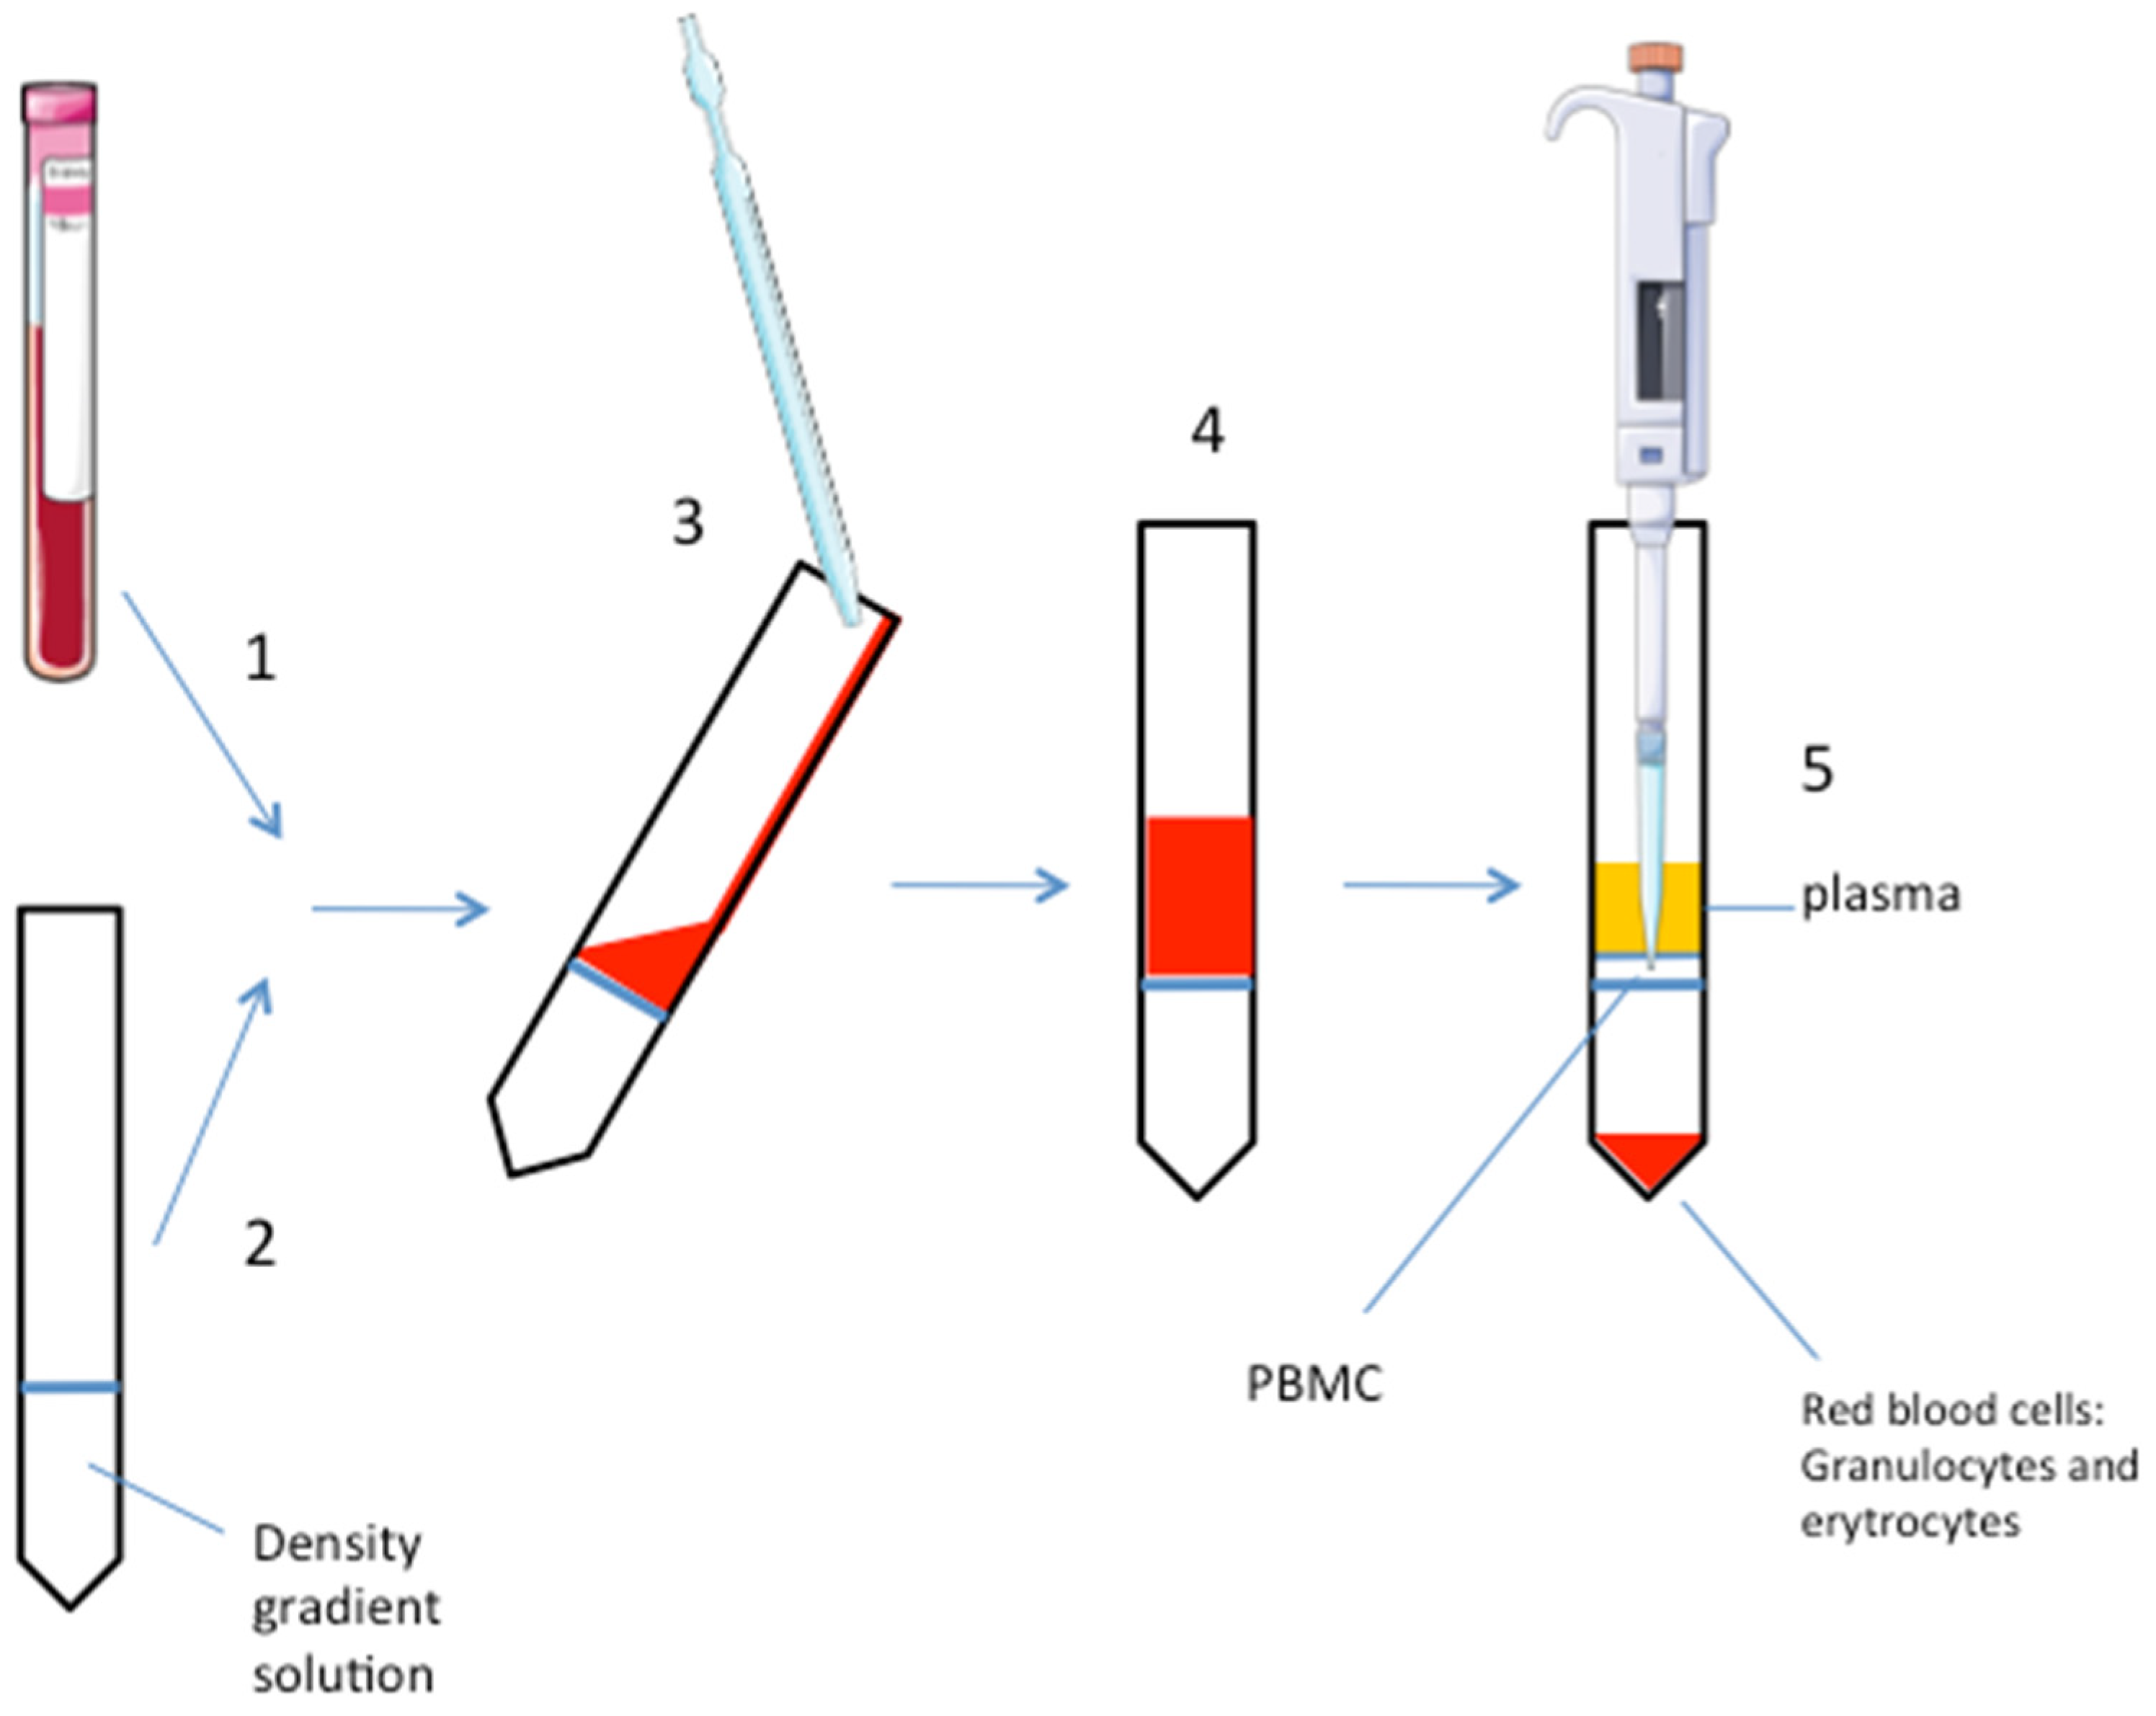 Optimization of Peripheral Blood Mononuclear Cell Extraction from Small Volume of Blood Samples: Potential Implications for Children-Related Diseases